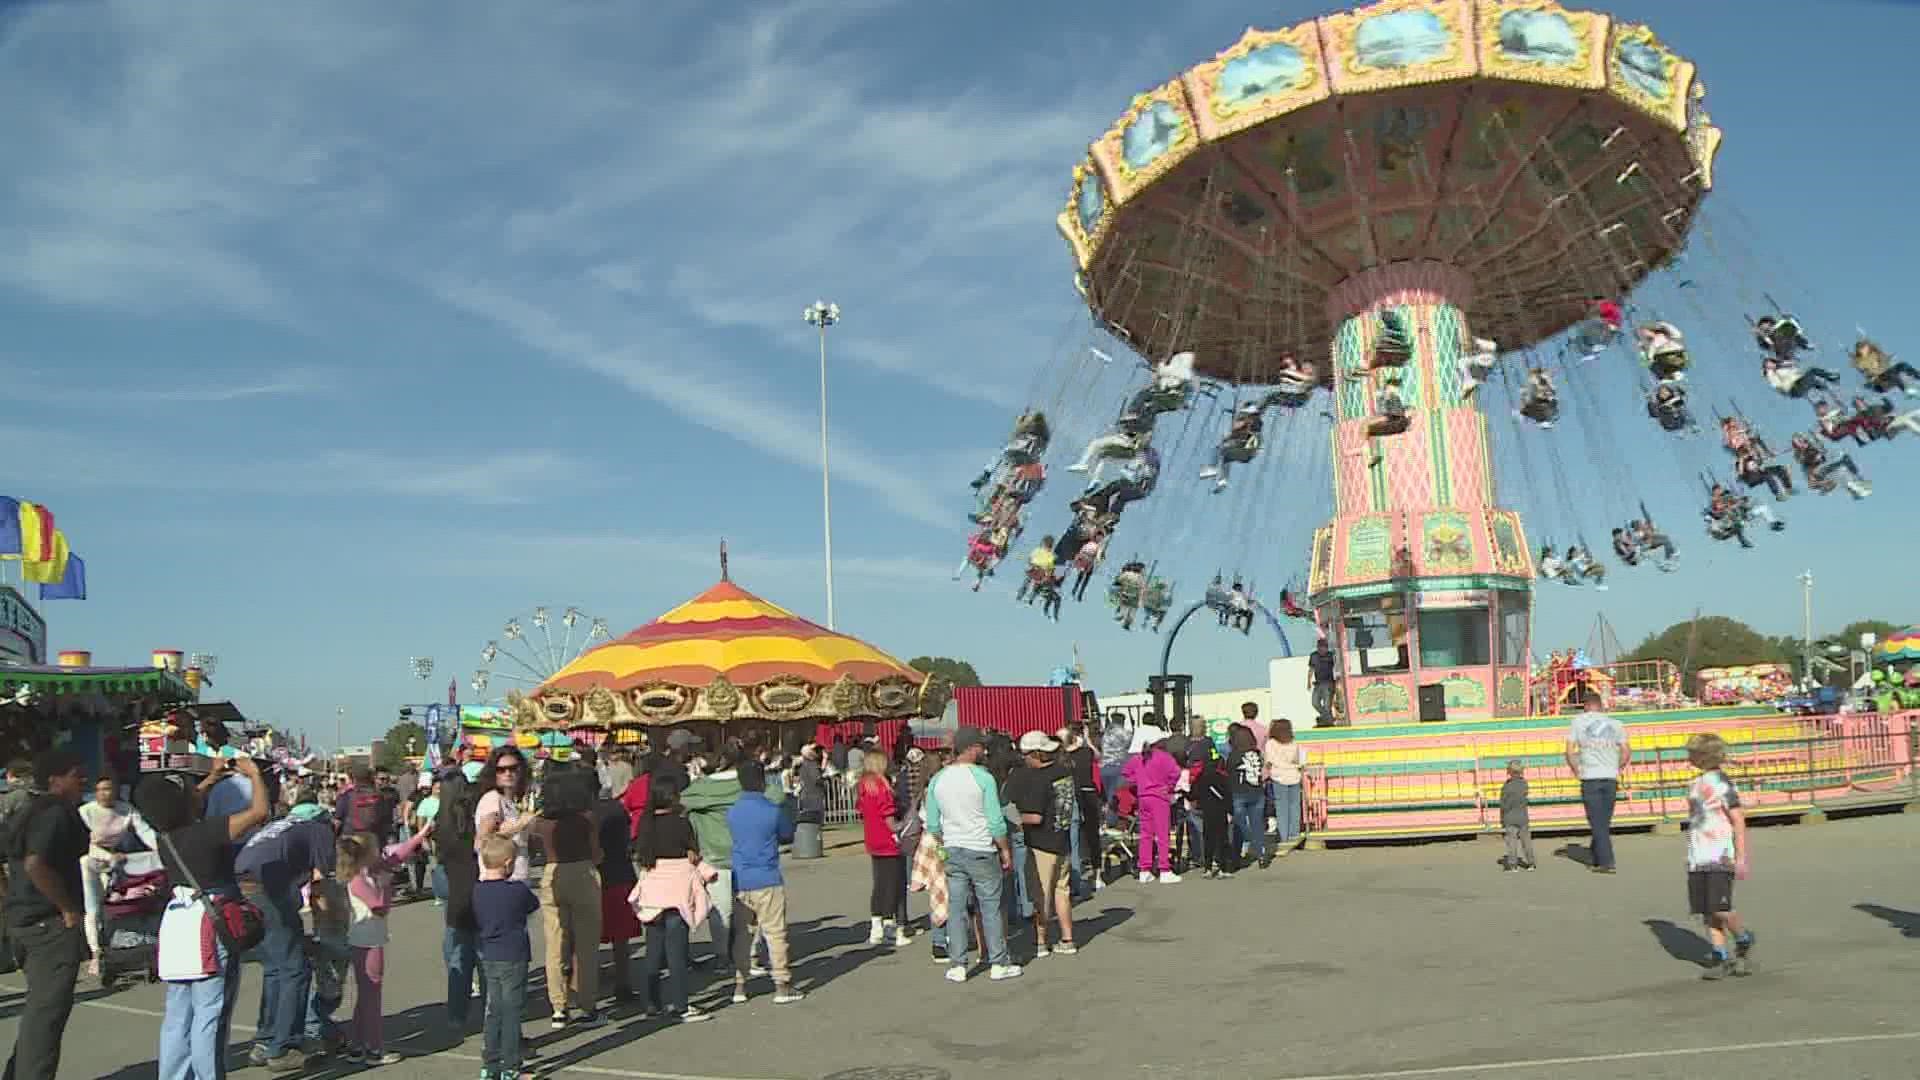 You could win money by entering contests at the Carolina Classic Fair.